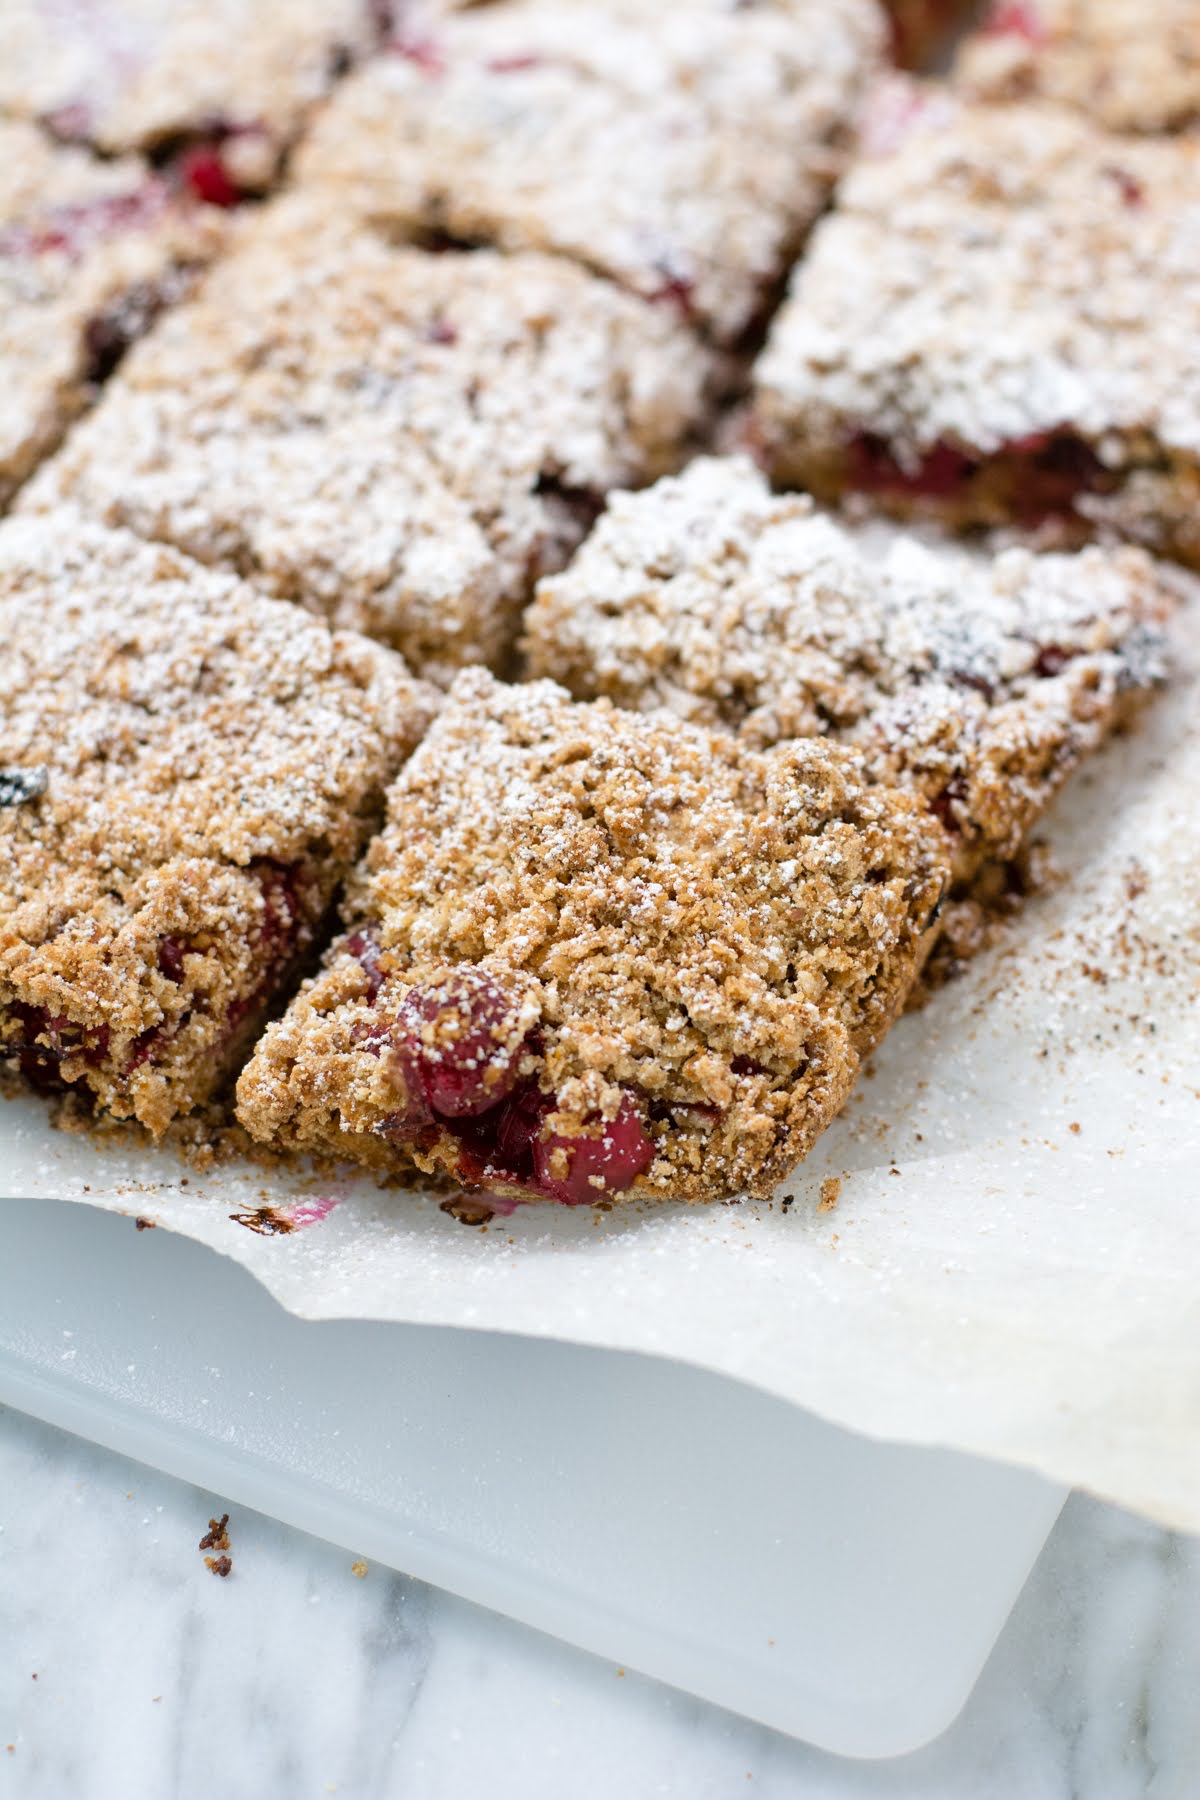 Cranberry bars with powdered sugar on top.